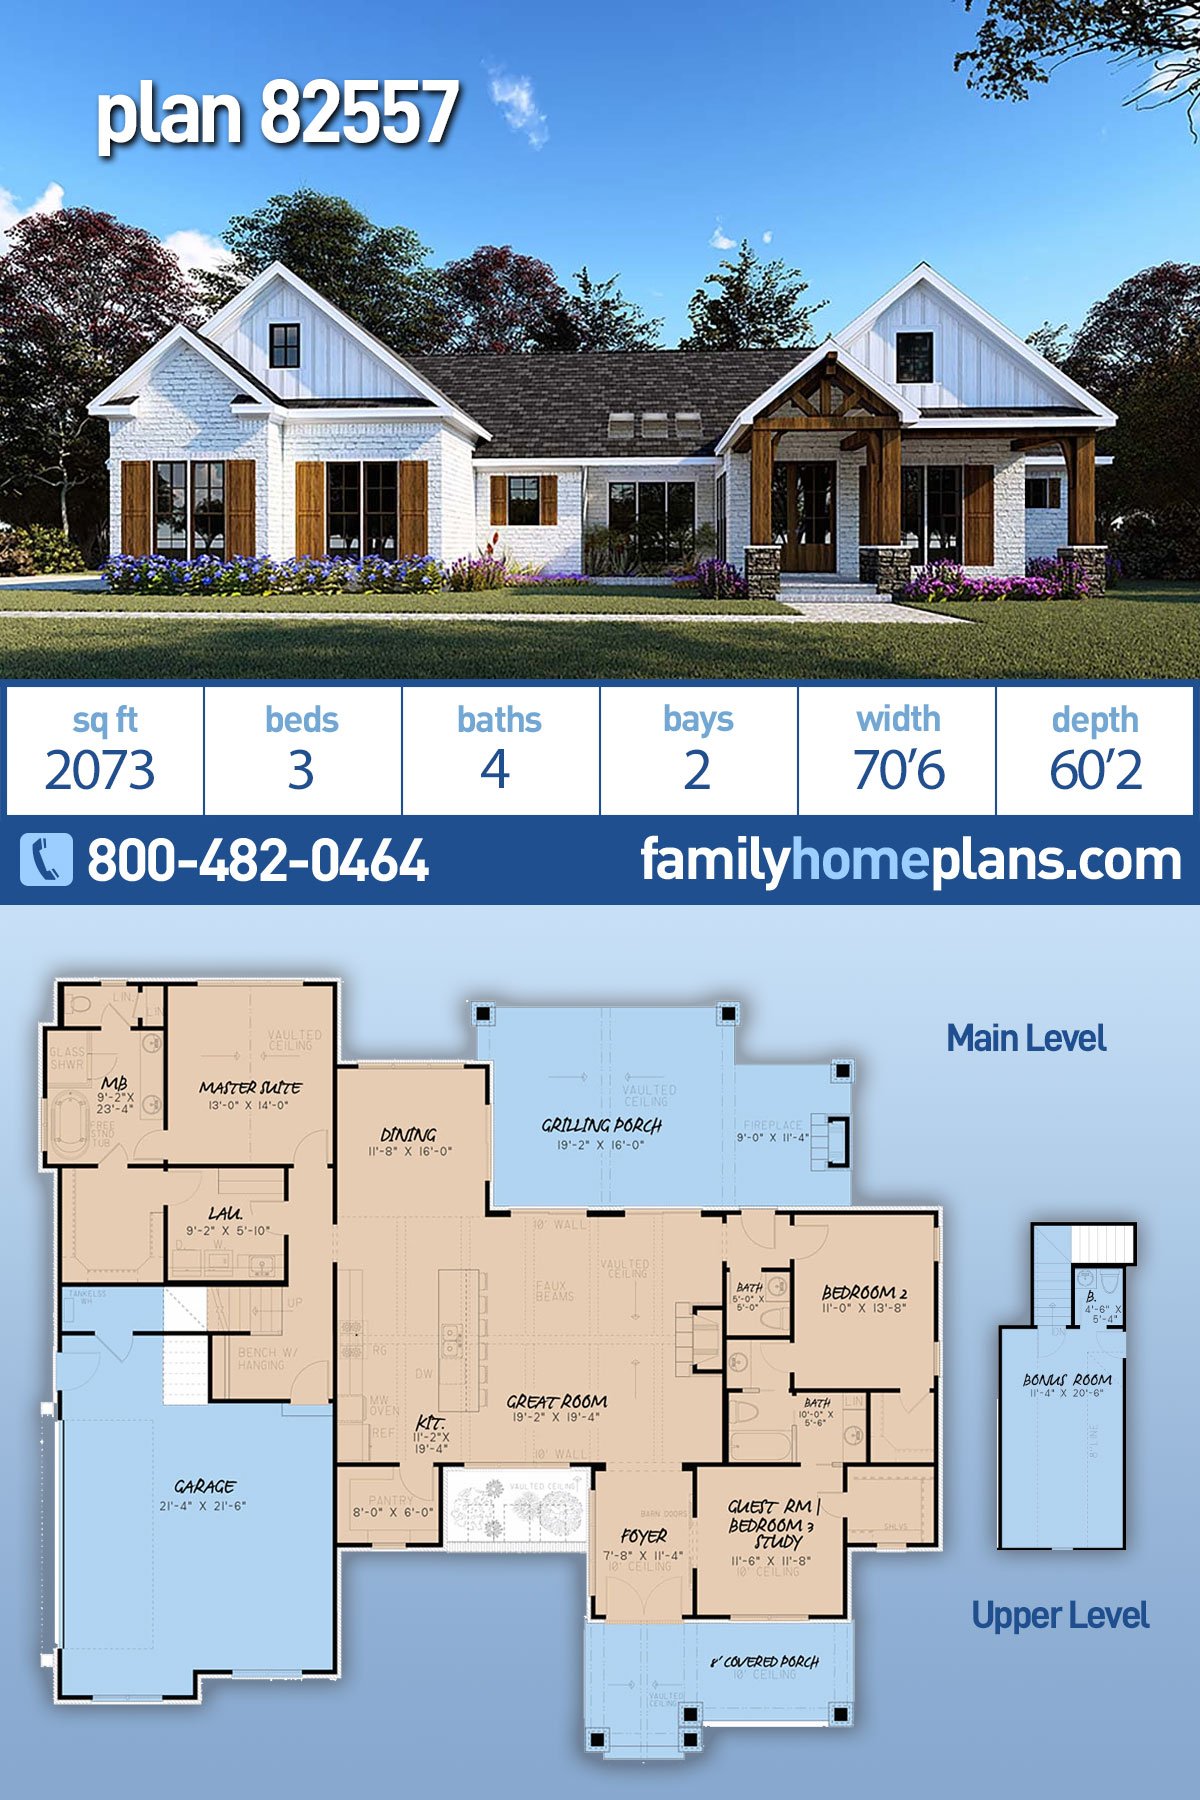 Bungalow, Craftsman, Farmhouse, One-Story House Plan 82557 with 3 Beds, 4 Baths, 2 Car Garage